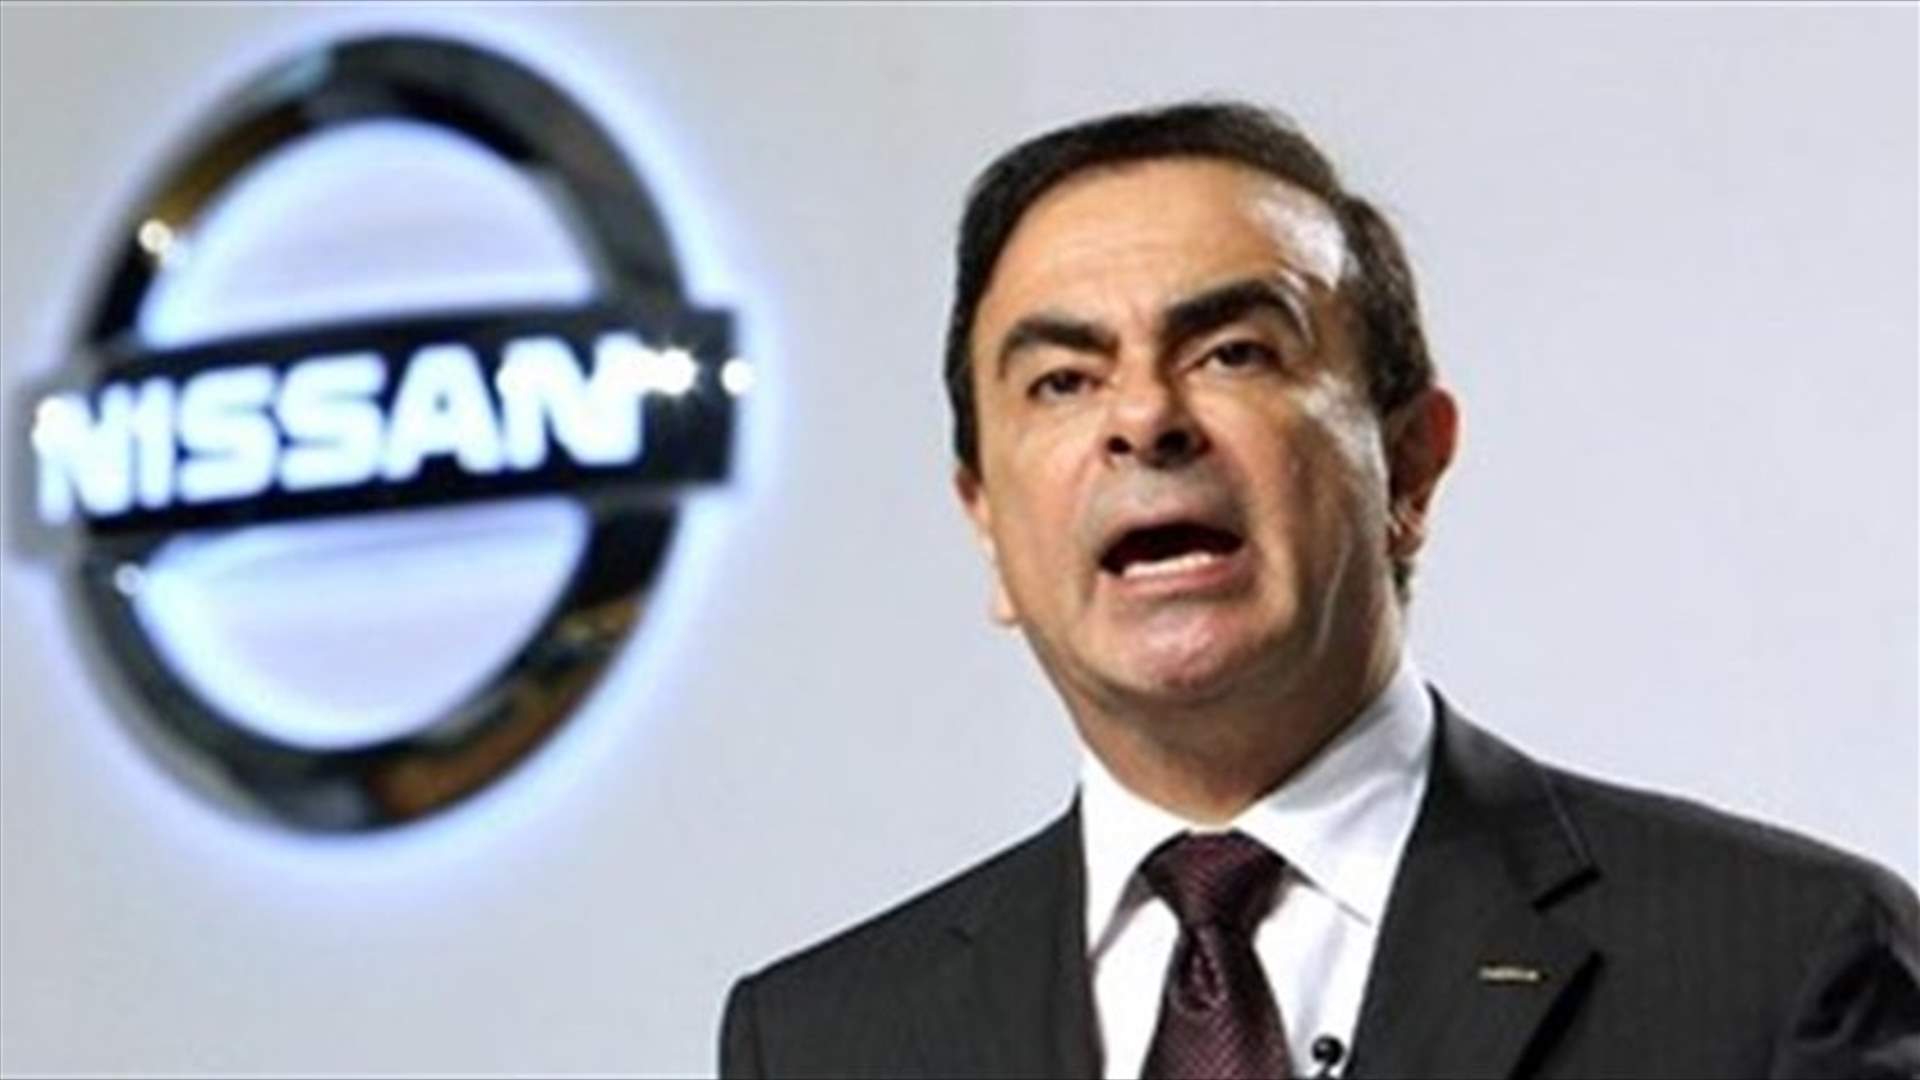 Renault says it is considering new governance, CEO Ghosn succession